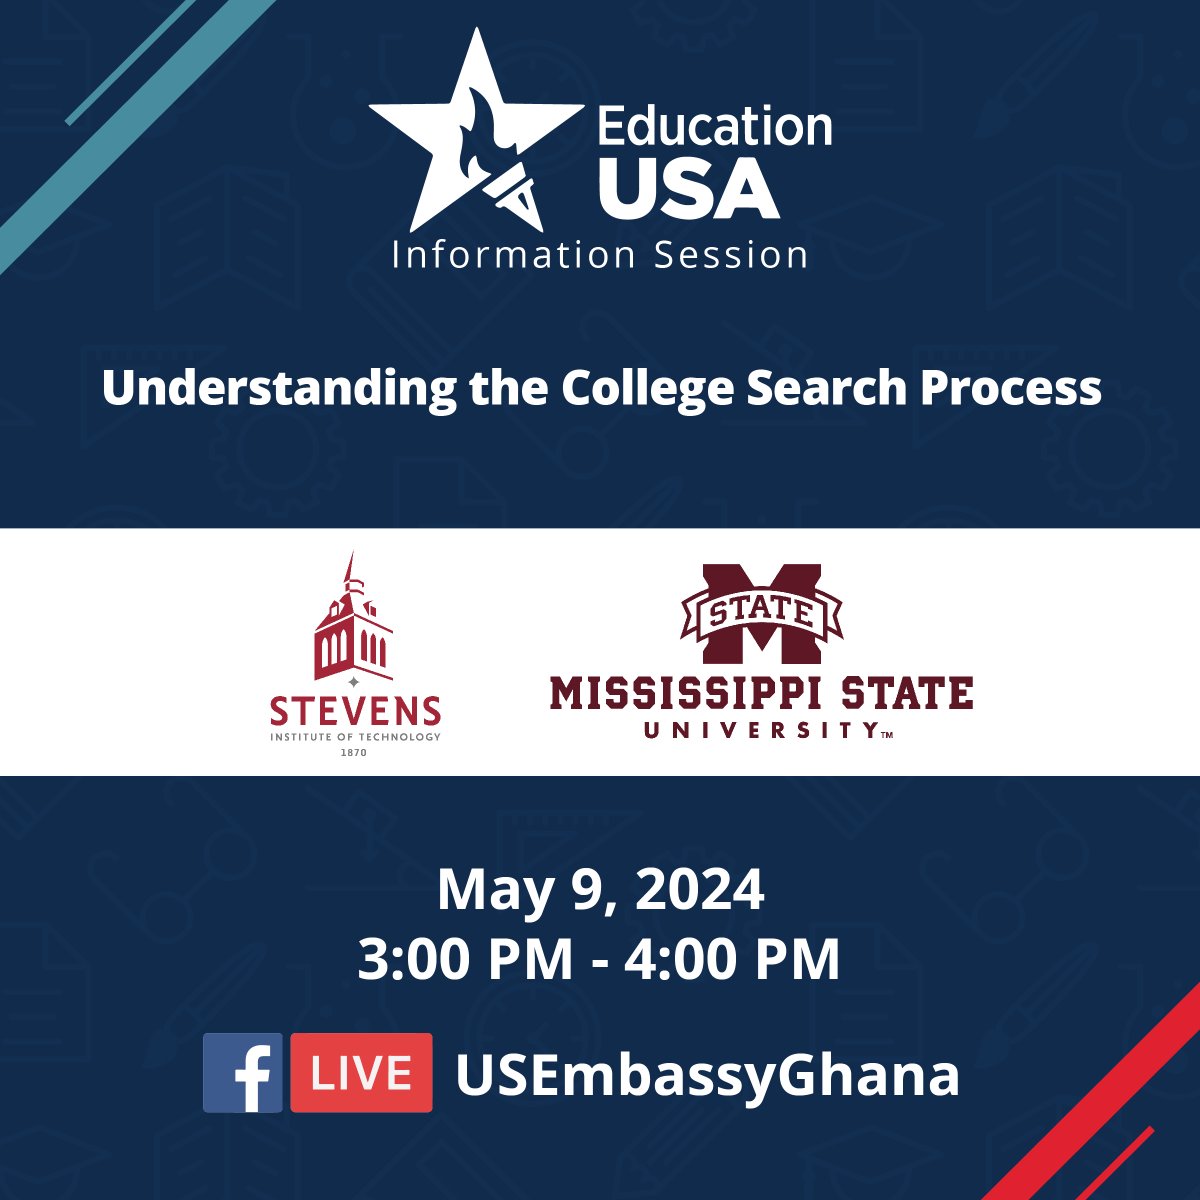 Join us for an EducationUSA Facebook Live Information Session at 3pm GMT on May 9, 2024.